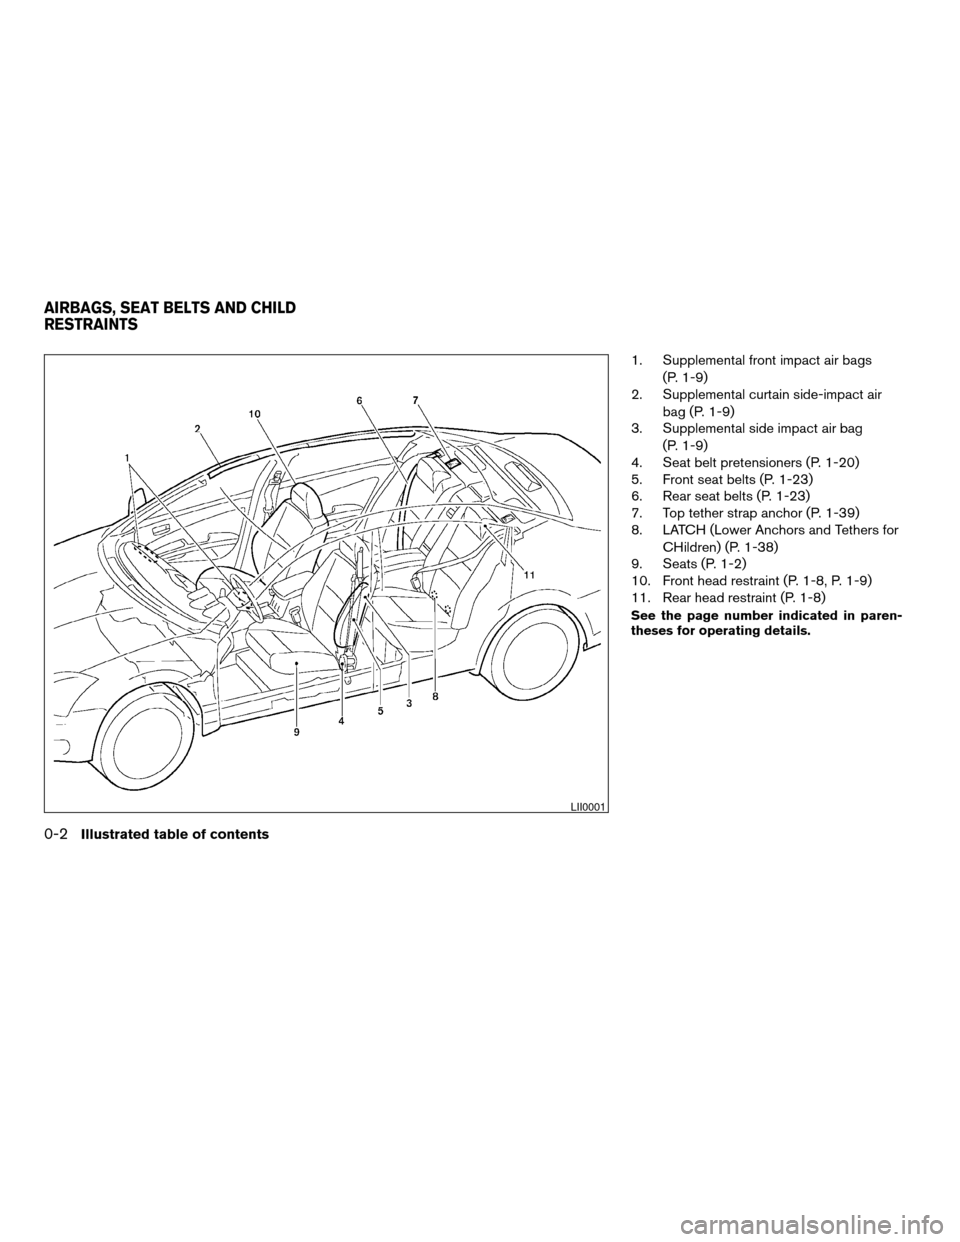 NISSAN MAXIMA 2004 A34 / 6.G Owners Manual 1. Supplemental front impact air bags
(P. 1-9)
2. Supplemental curtain side-impact air
bag (P. 1-9)
3. Supplemental side impact air bag
(P. 1-9)
4. Seat belt pretensioners (P. 1-20)
5. Front seat belt